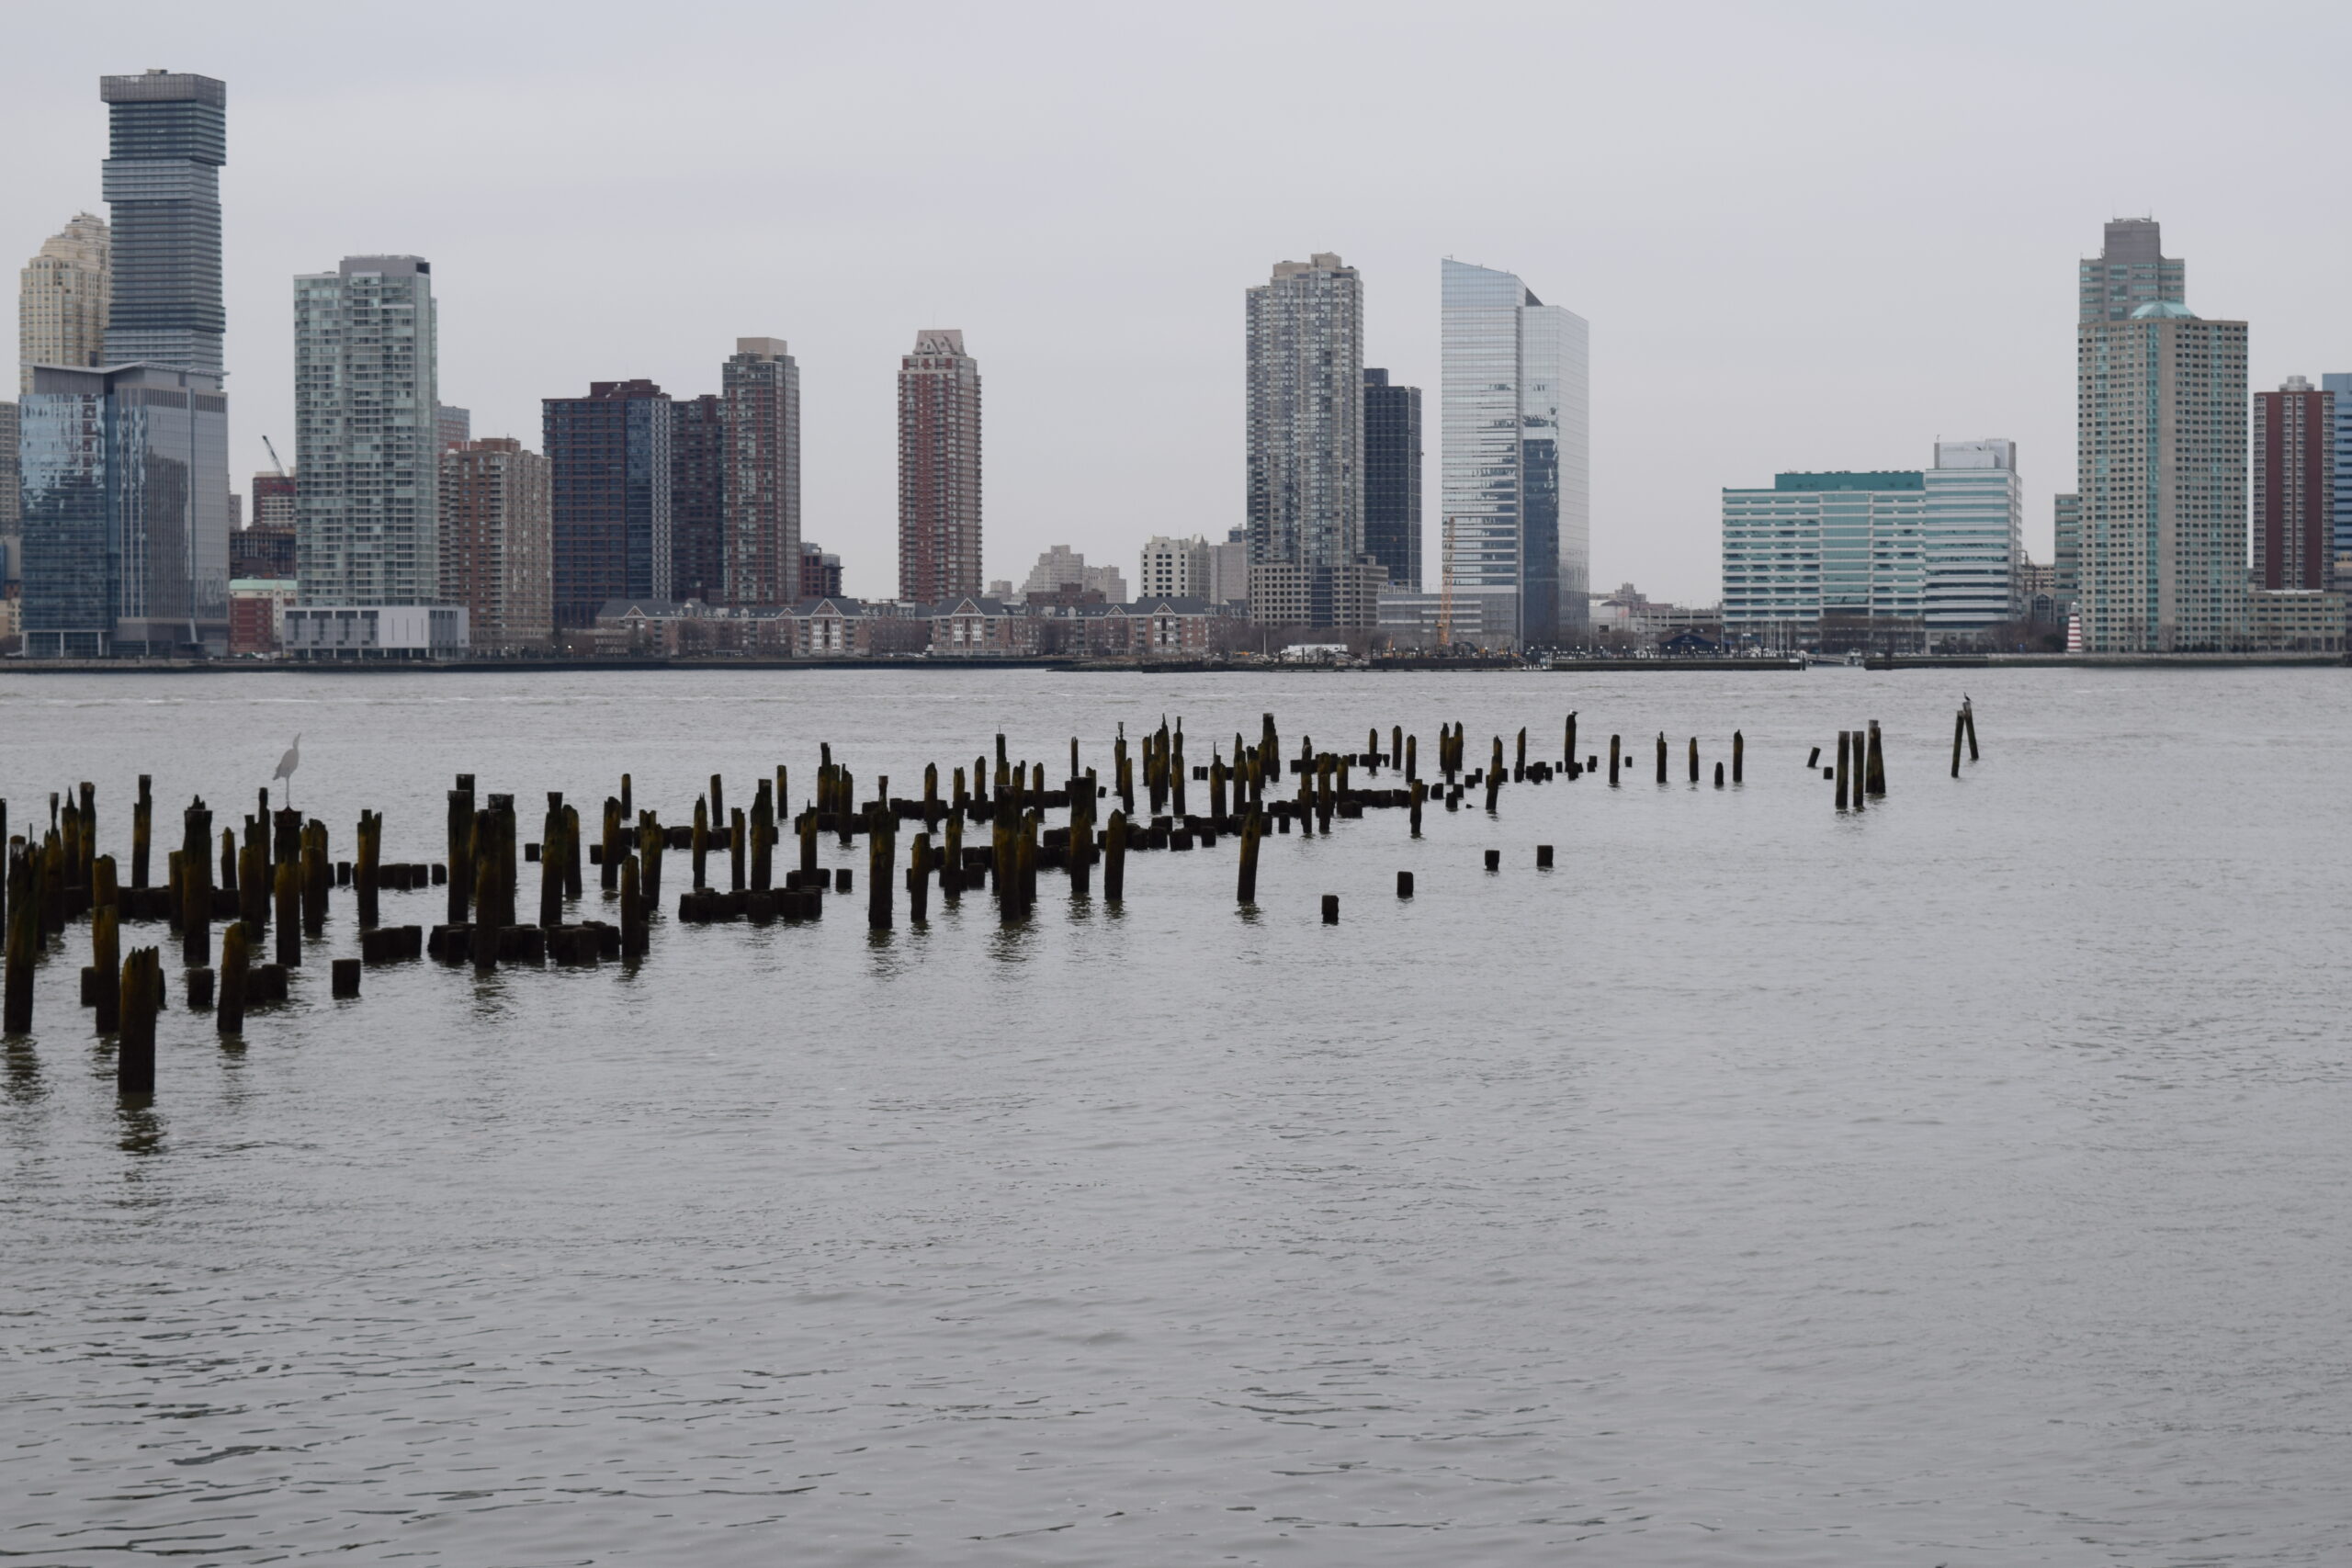 The pile field on the Hudson River is one of the places Hudson River Park grows oysters